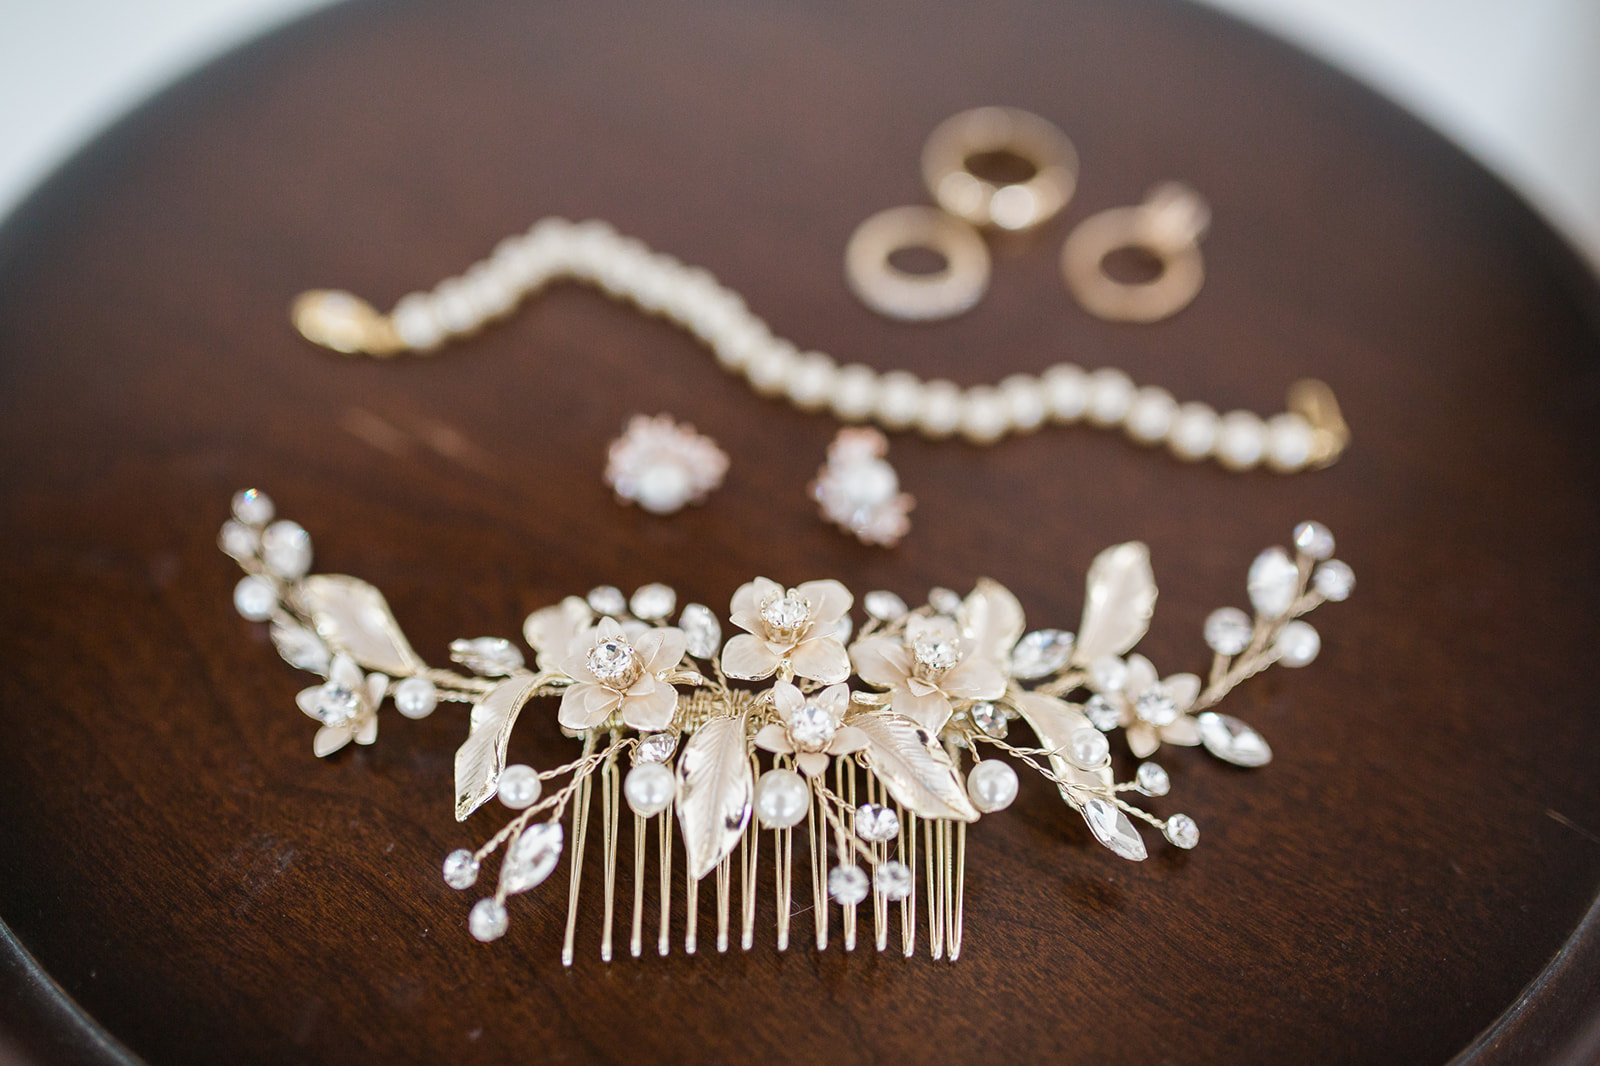 decorative hair comb and jewelry for manor wedding bride